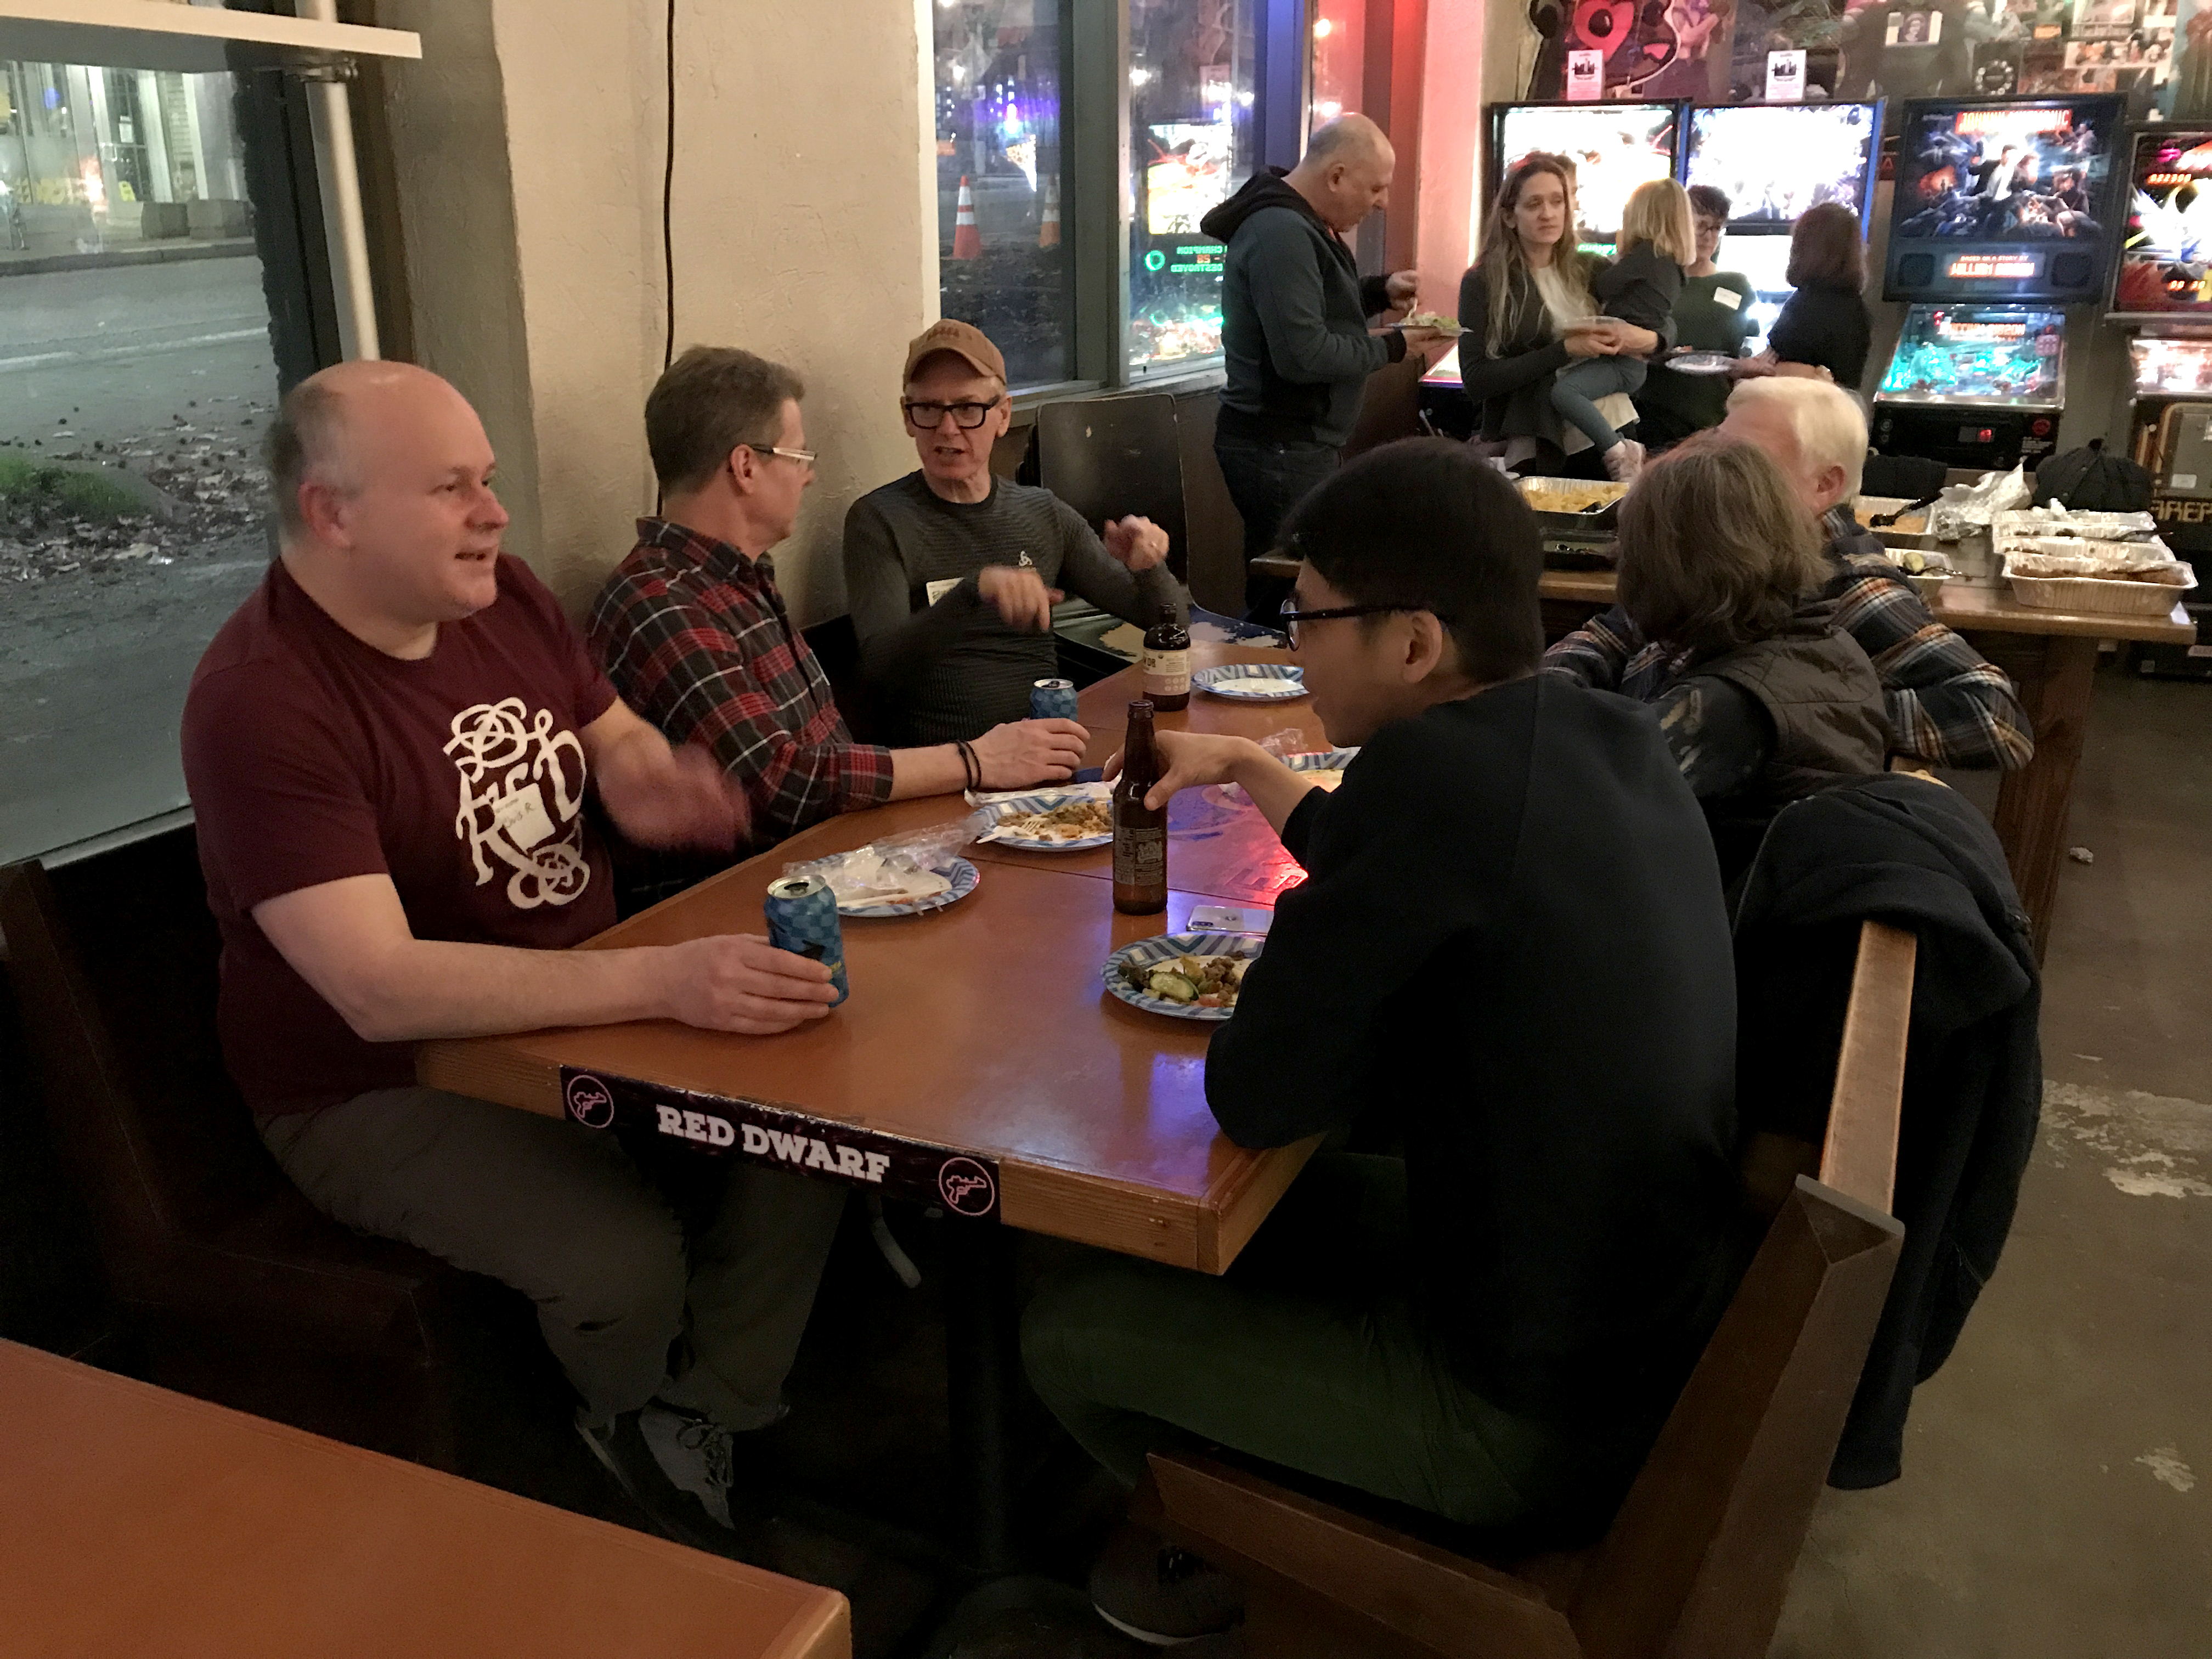 A group of people conversing at a restaurant table